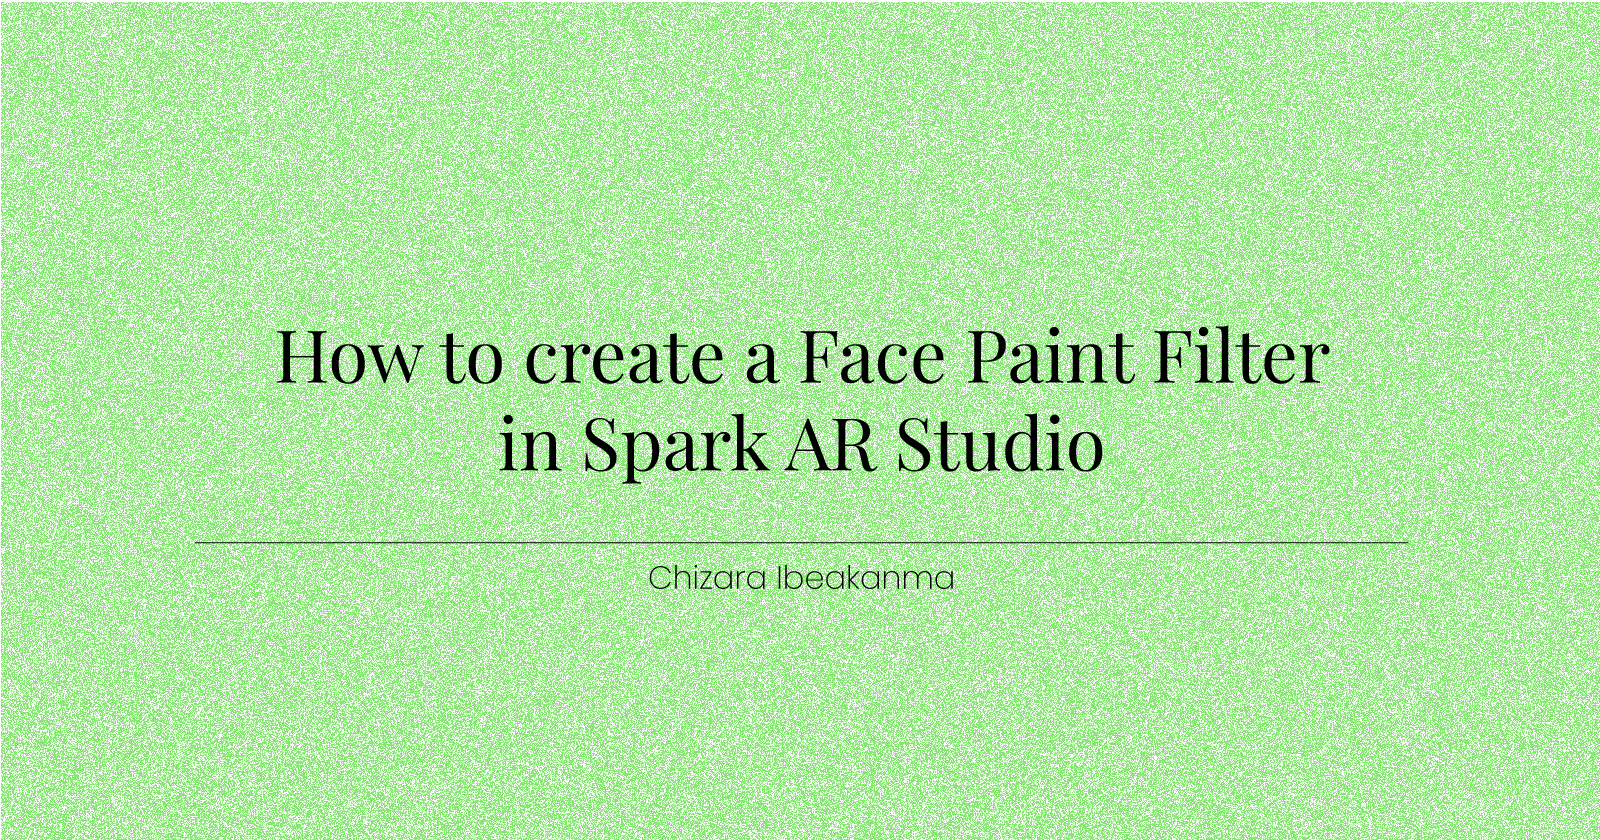 How to create a Face Paint Filter in Spark AR Studio